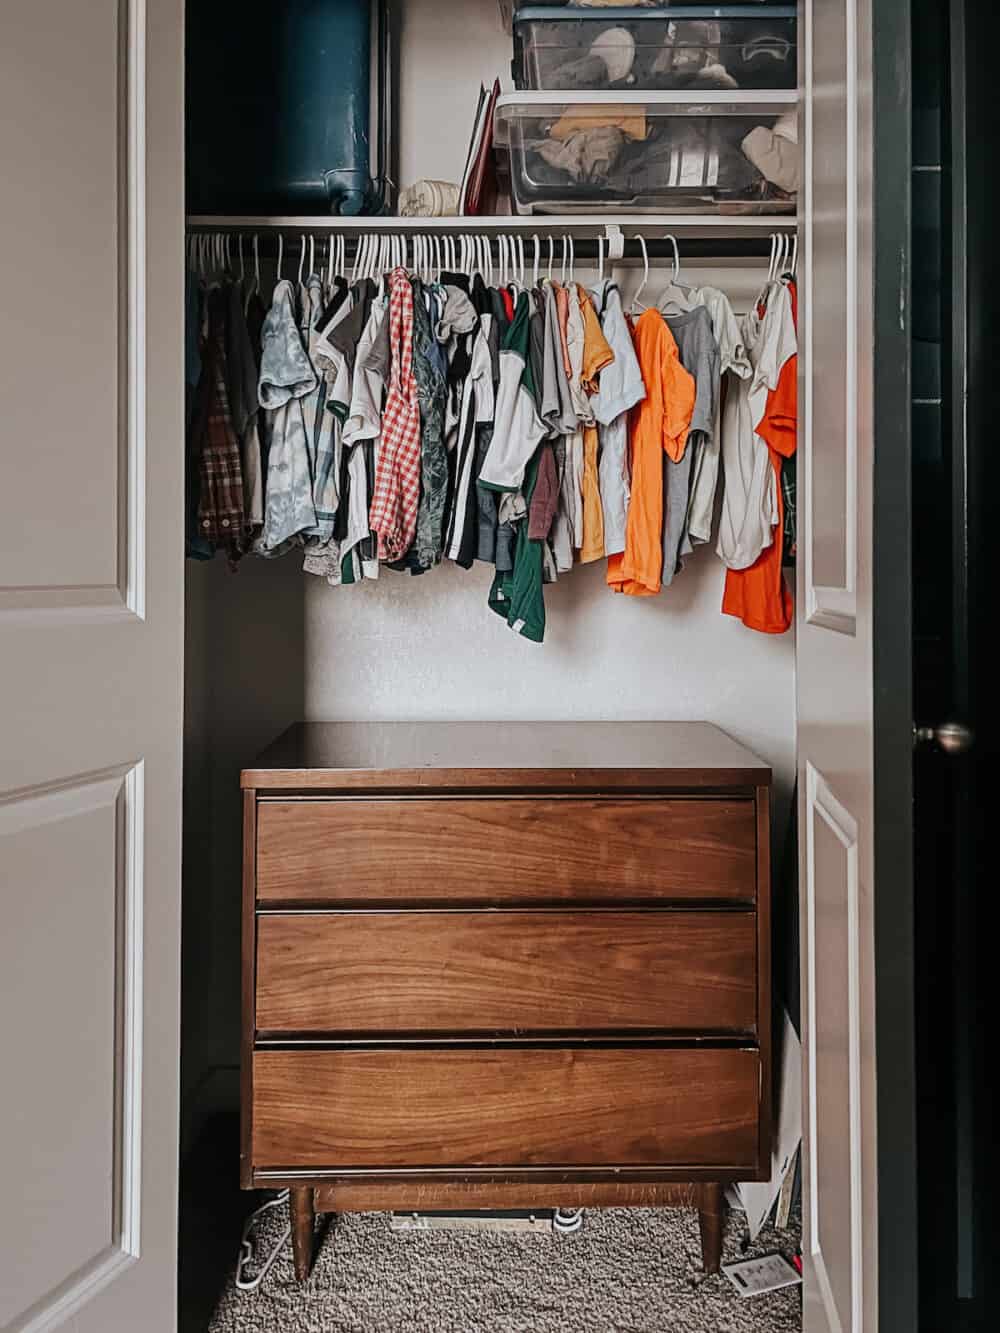 small reach-in closet with a dresser in the bottom half